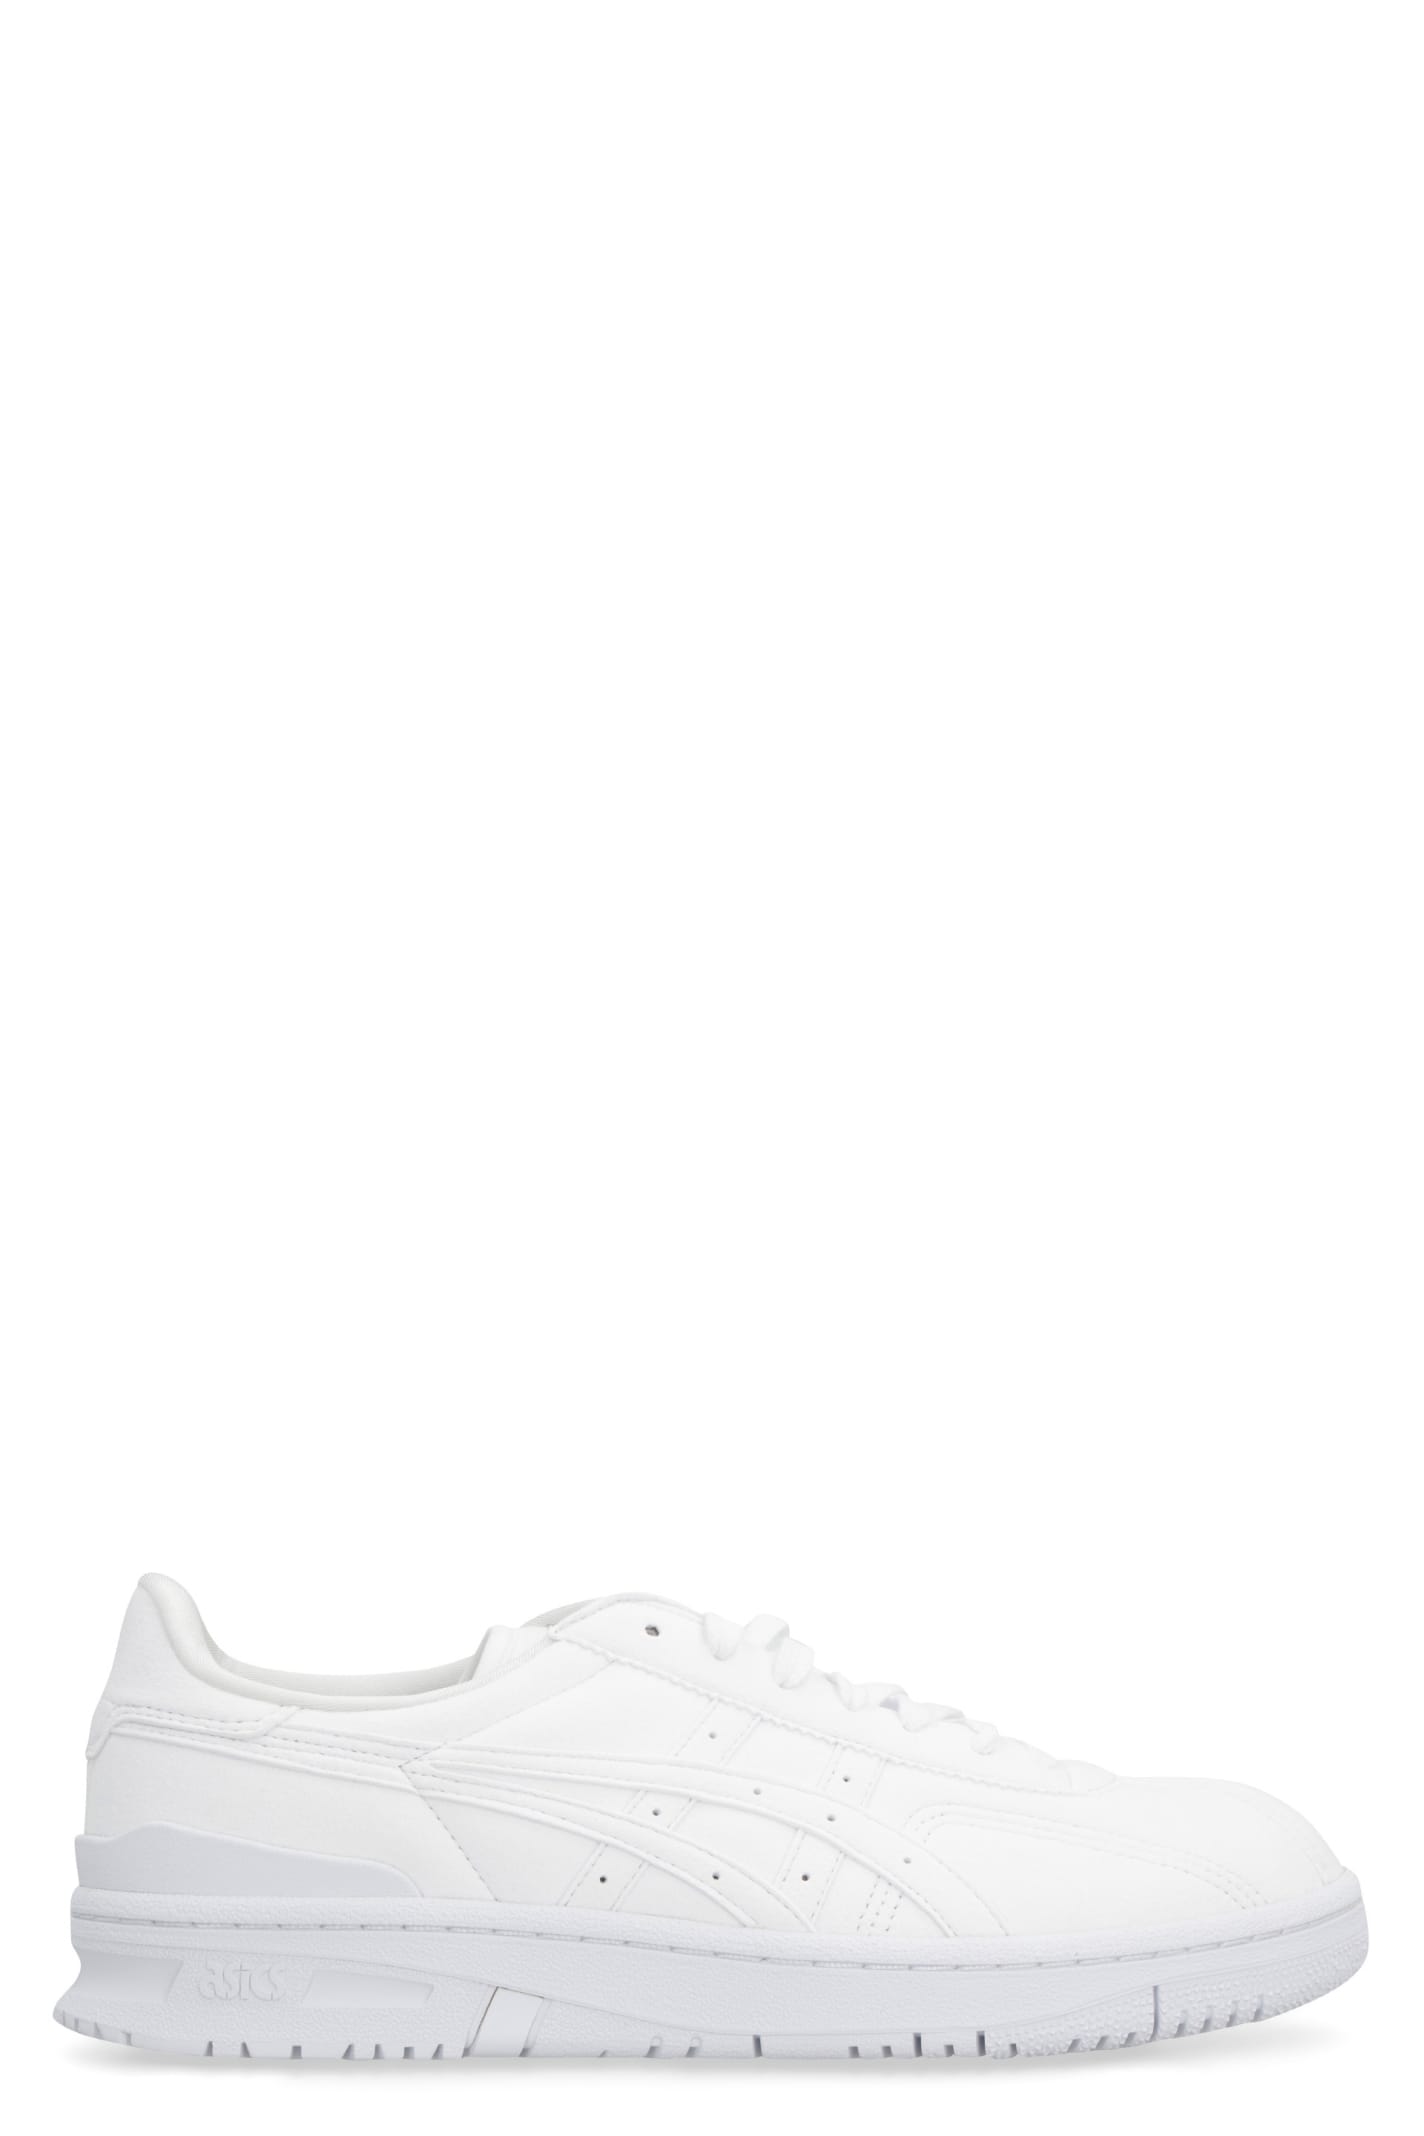 Comme Des Garçons Shirt Leather Low-top Sneakers In White